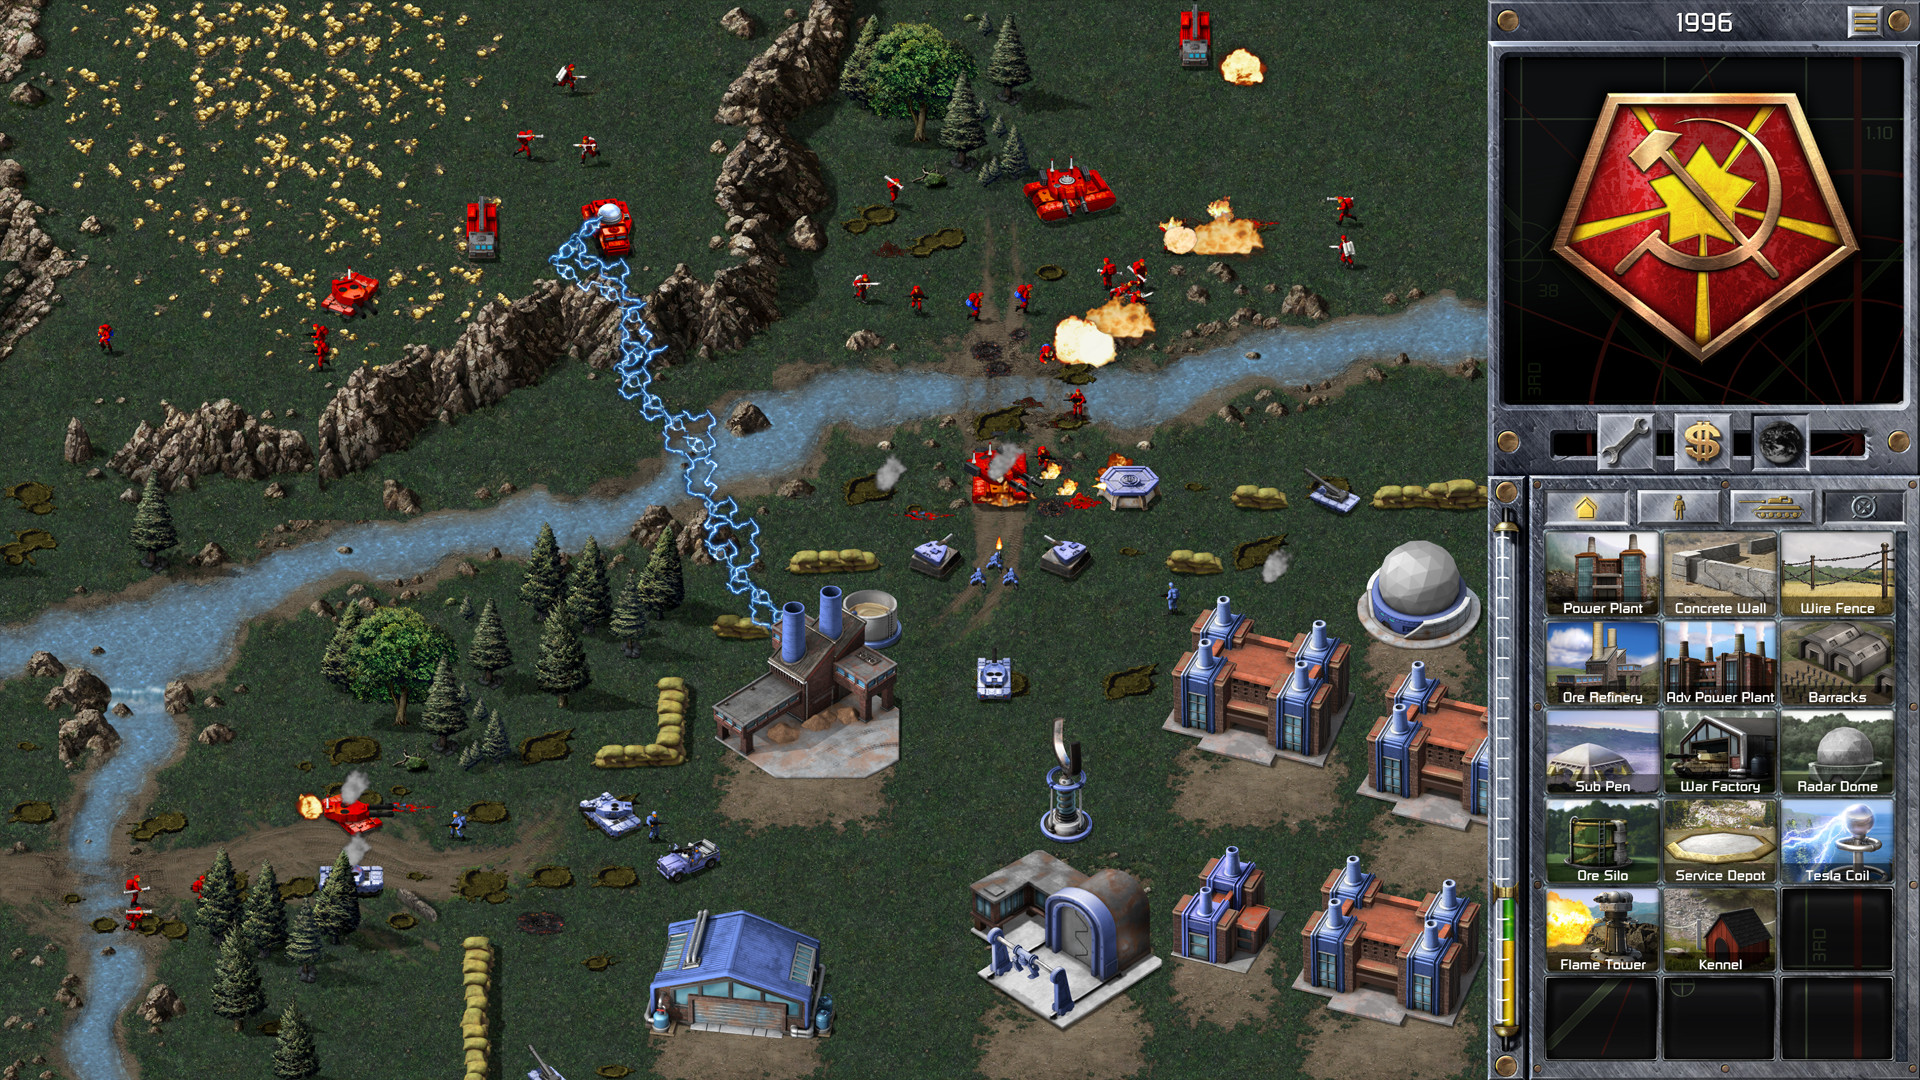 hende gambling stamtavle Save 60% on Command & Conquer™ Remastered Collection on Steam